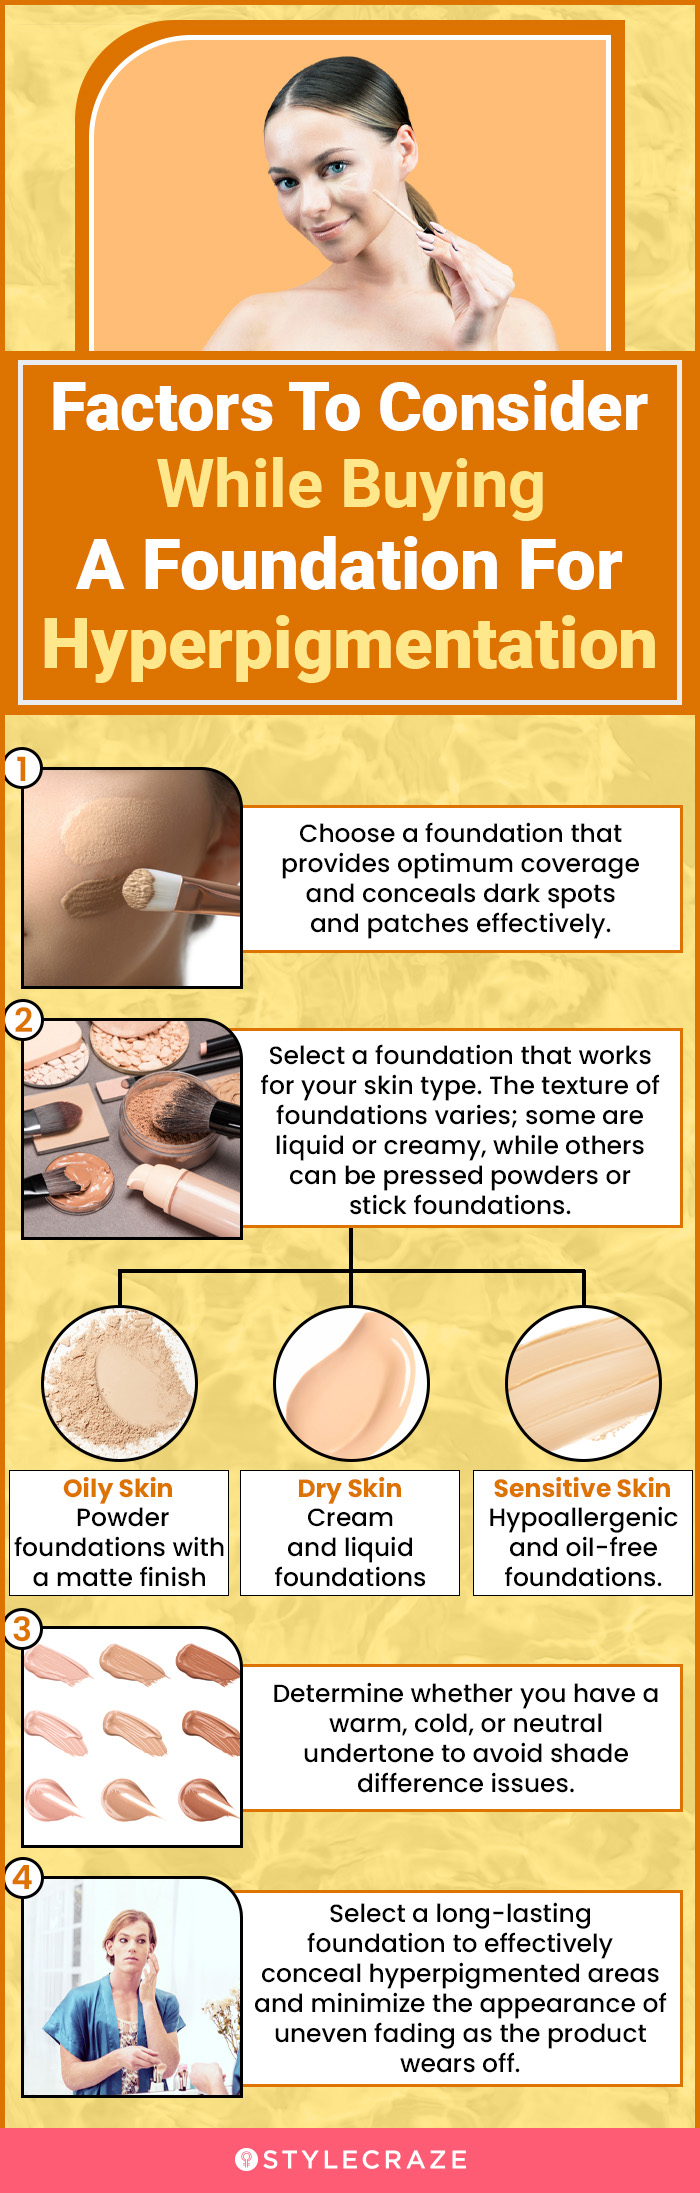 Tips To Consider Before Buying Foundation For Hyperpigmentation (infographic)